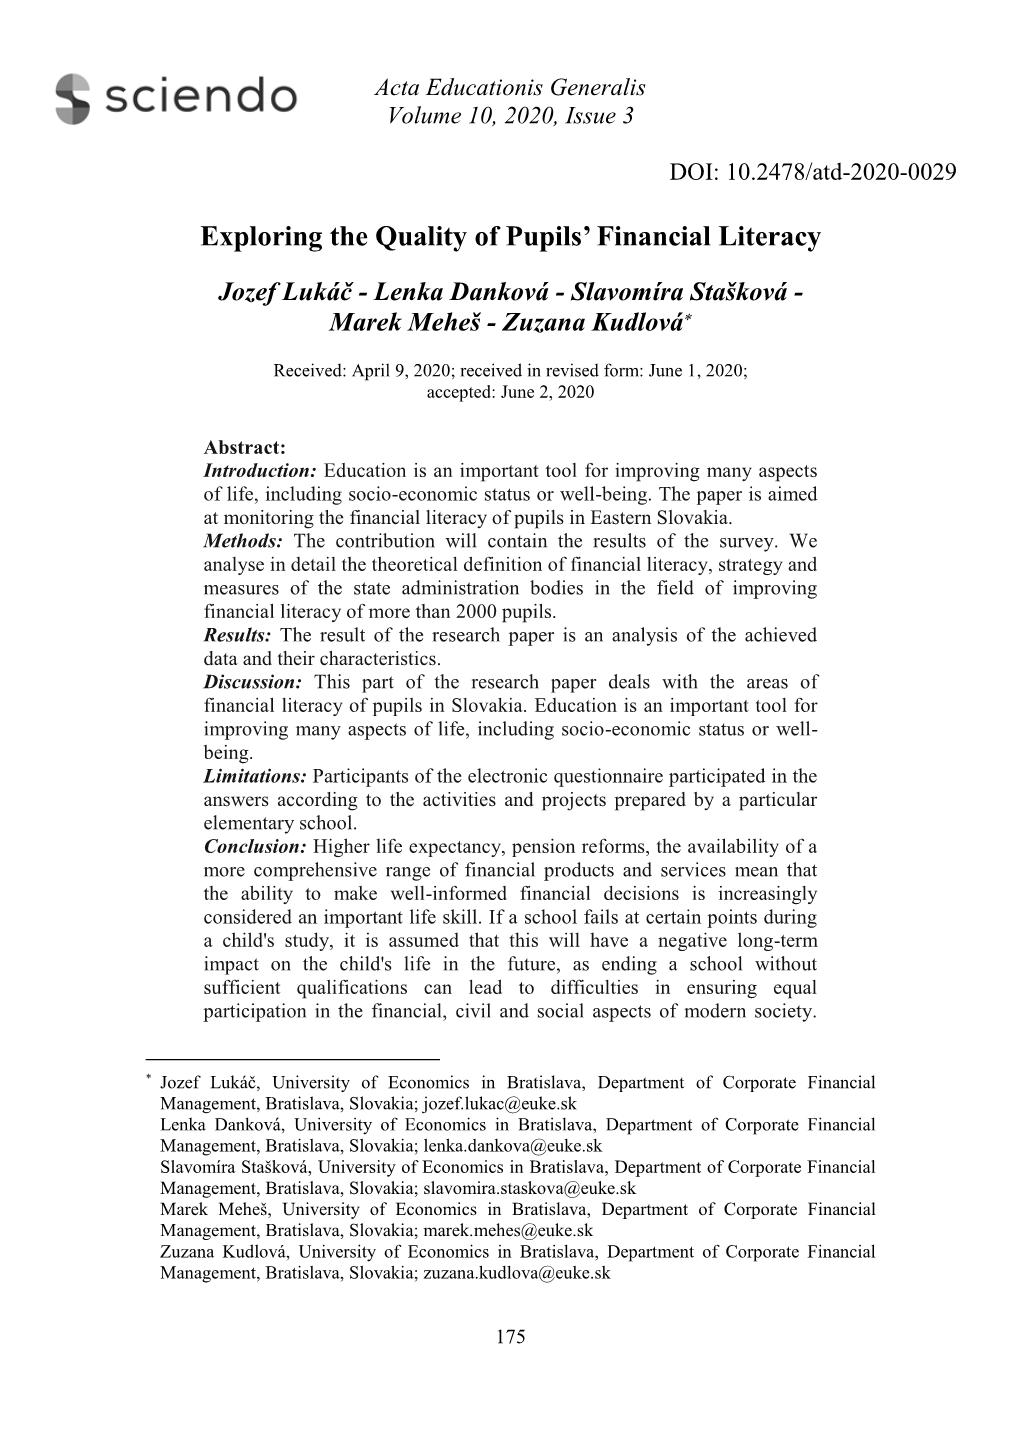 Exploring the Quality of Pupils' Financial Literacy